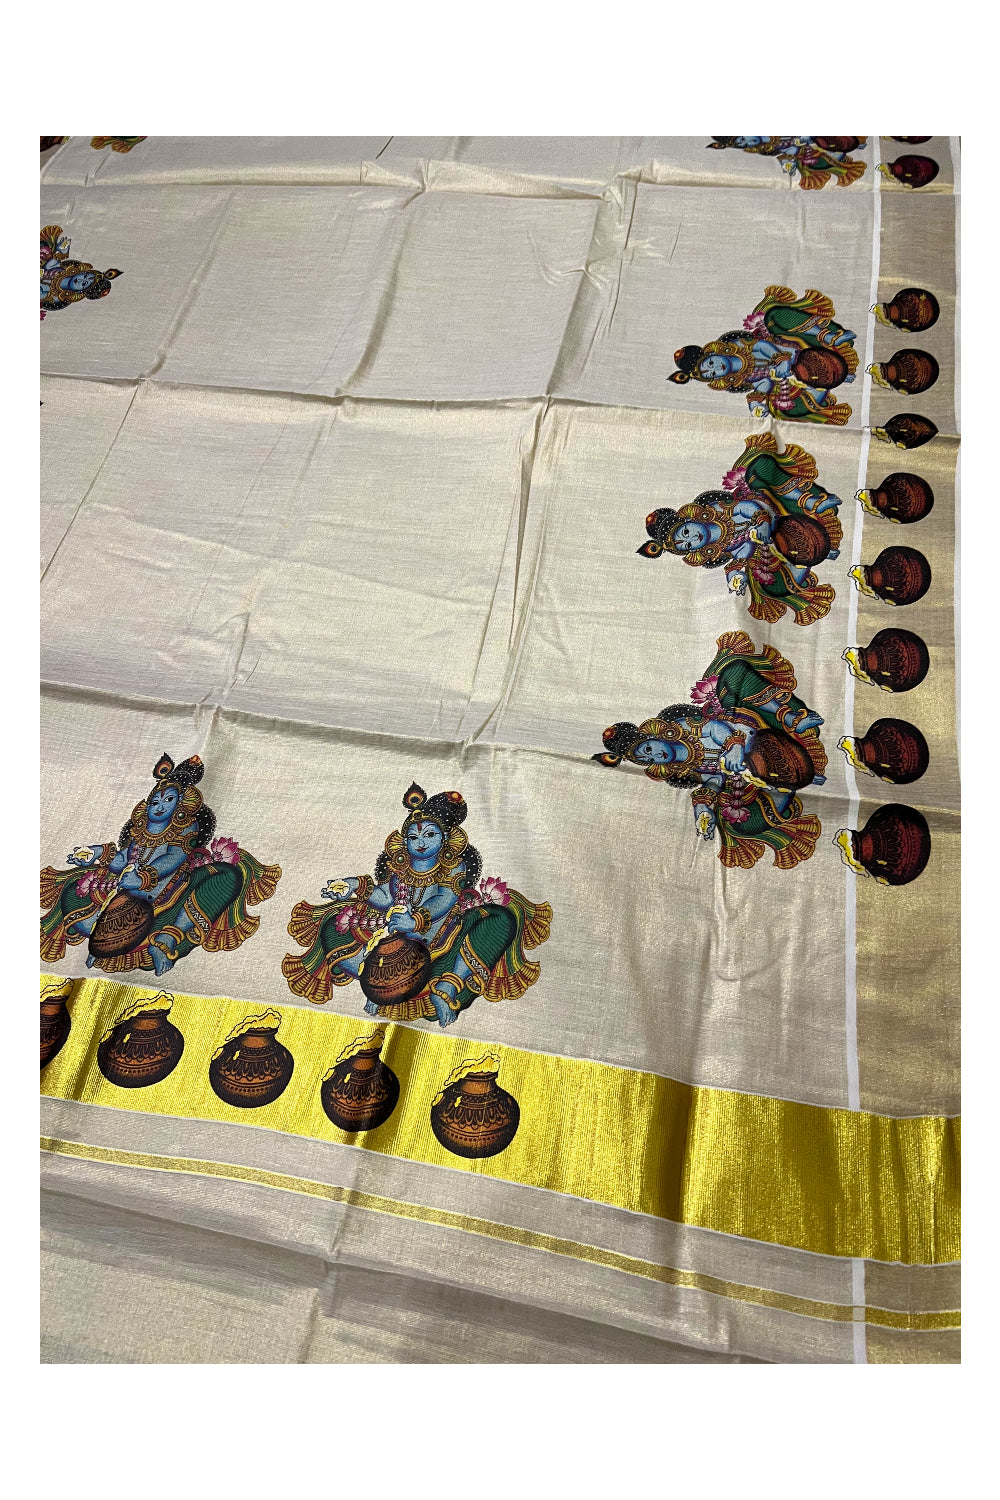 Kerala Tissue Kasavu Saree With Mural Printed Lord Krishna Design and Butter Pot Works on Border